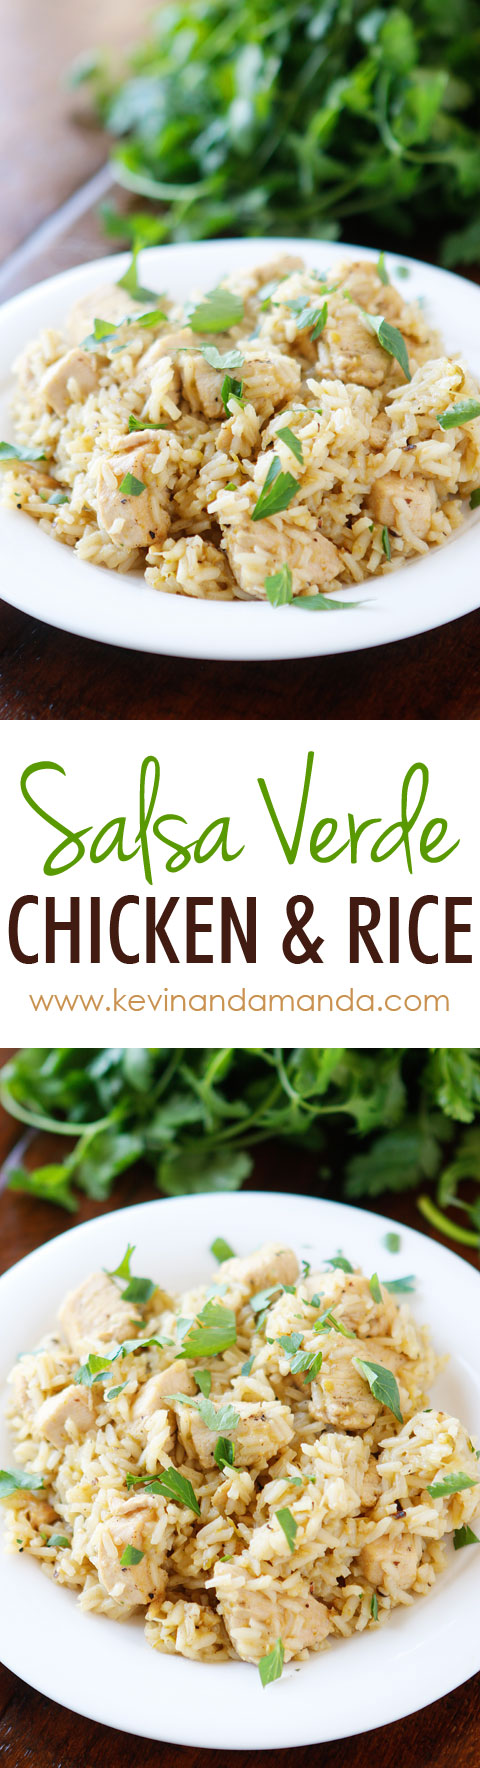 So easy! Only four ingredients. Chicken, rice, salsa verde, and chicken broth (or water). All cooks in one pot, even the rice! Perfect for a quick and easy weeknight meal.